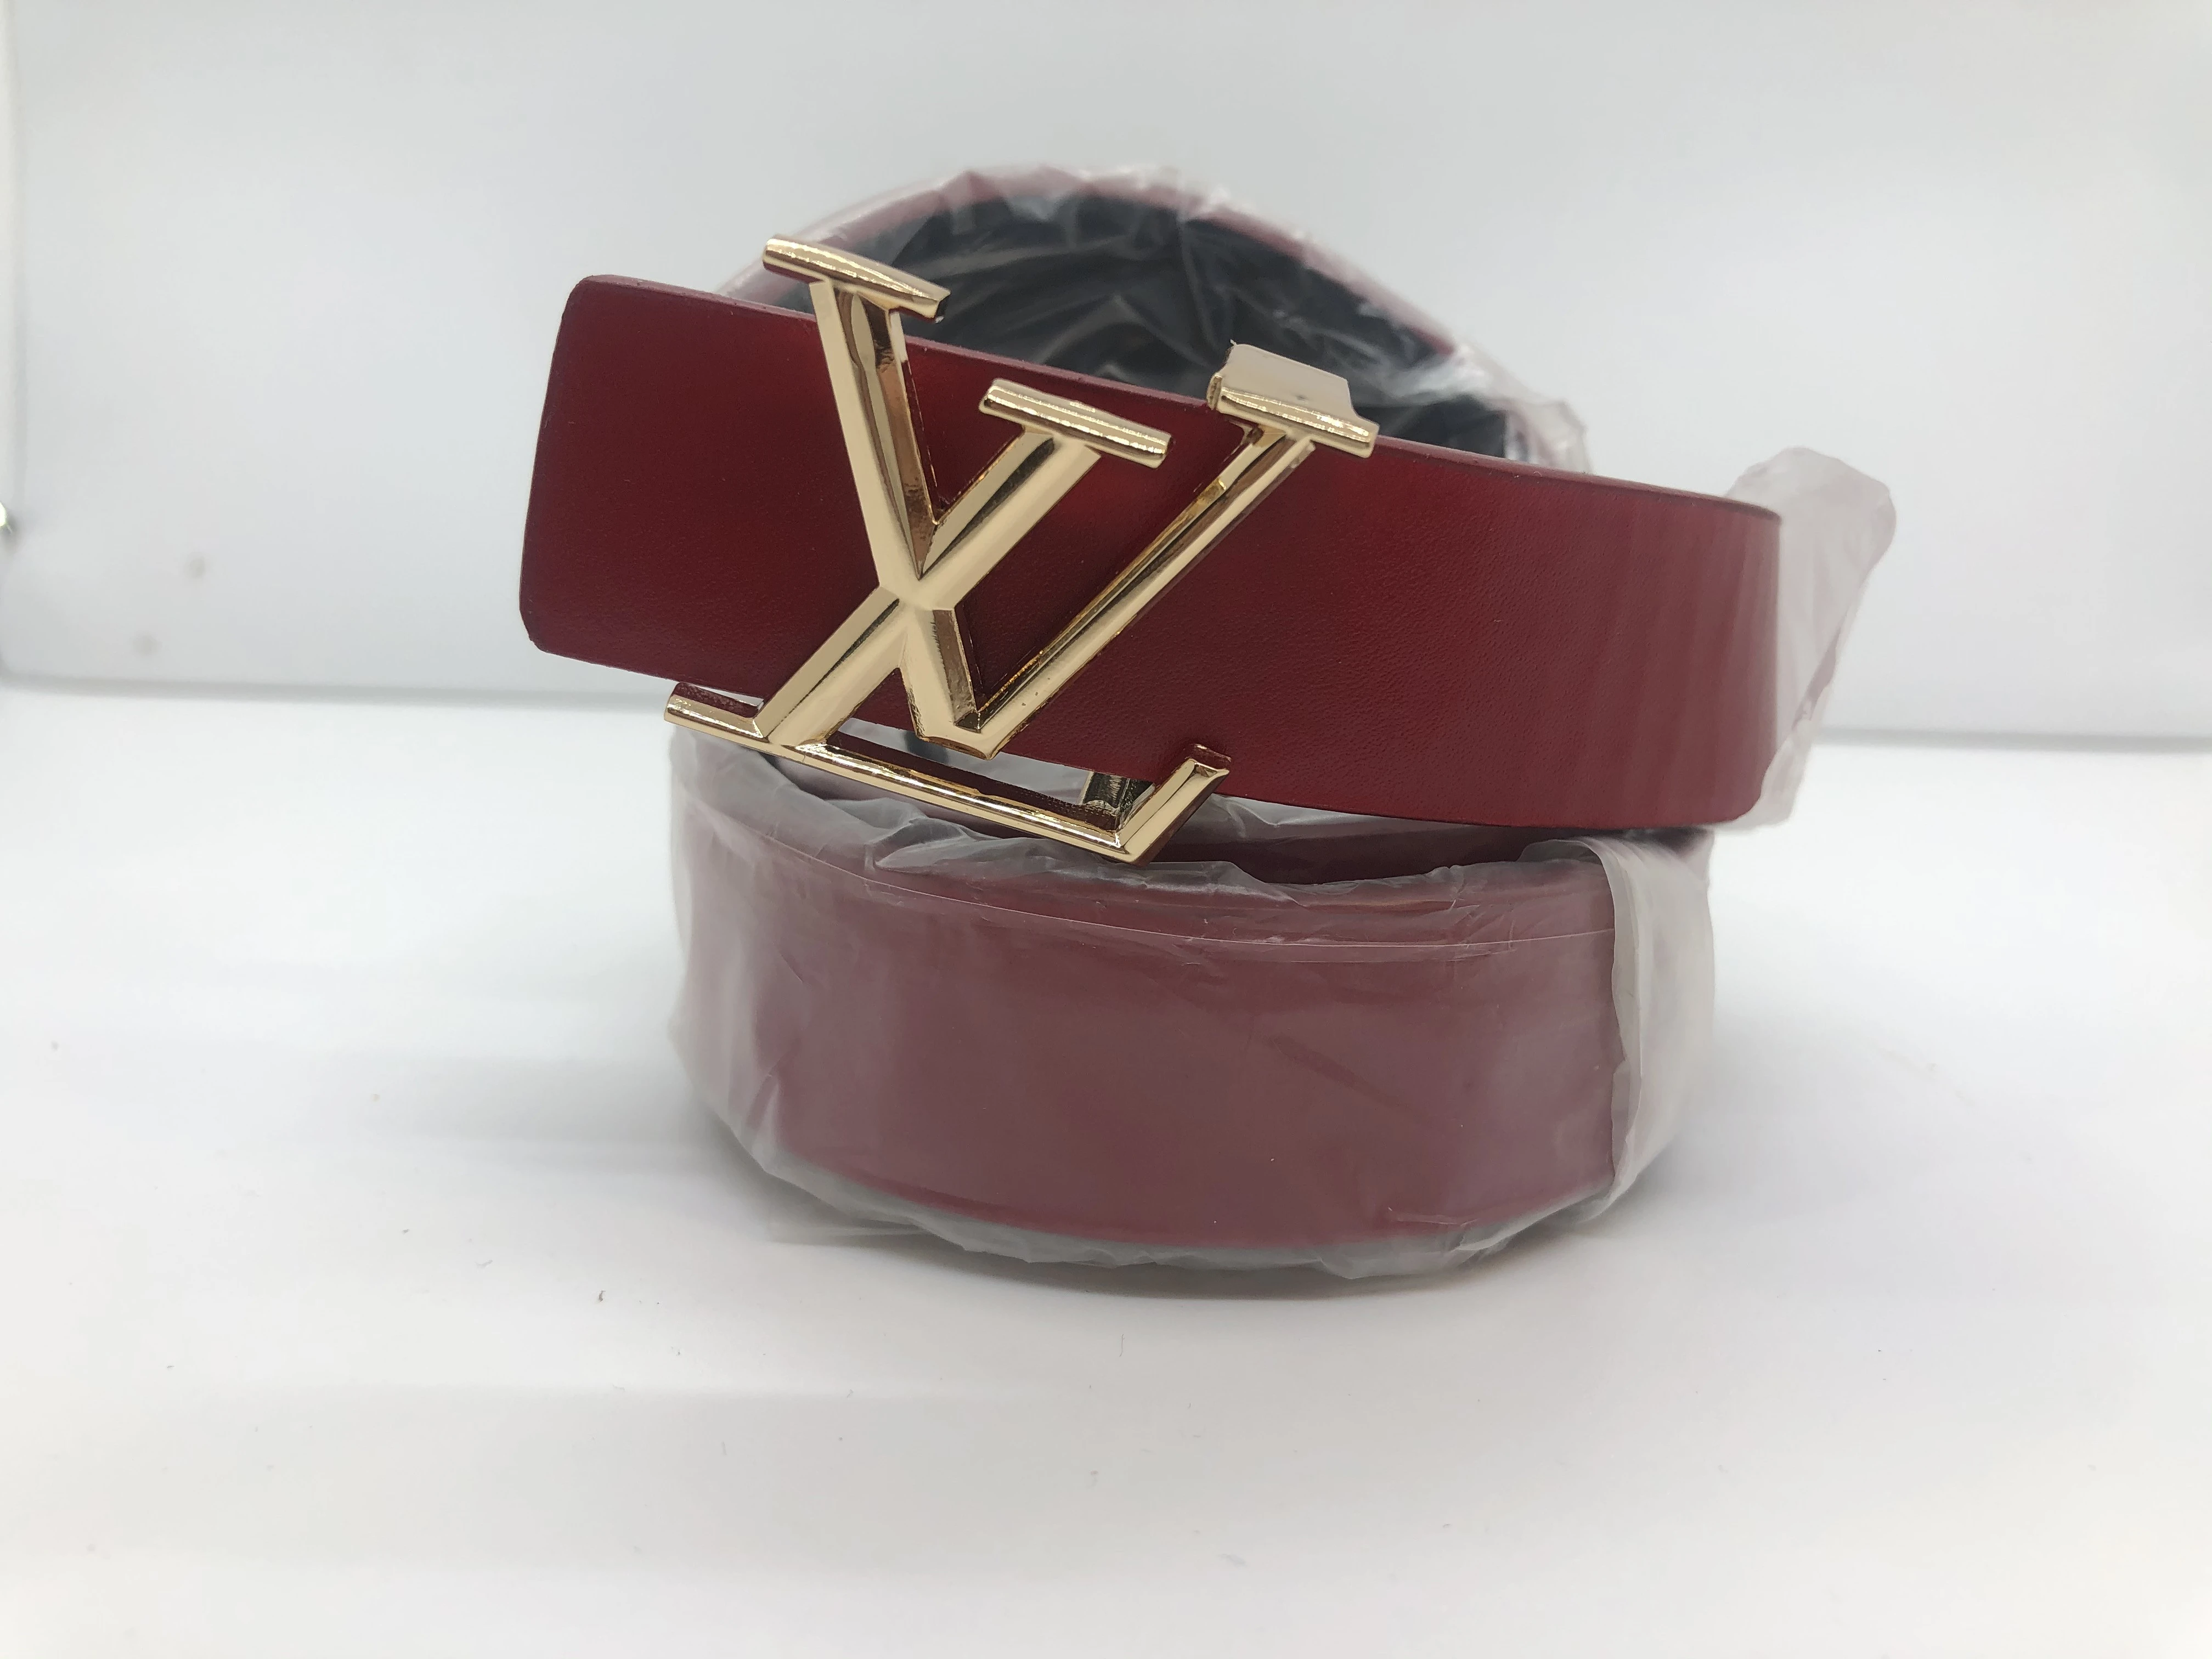 Louis Vuitton women's belt, maroon, golden buckle, finished with the brand's logo